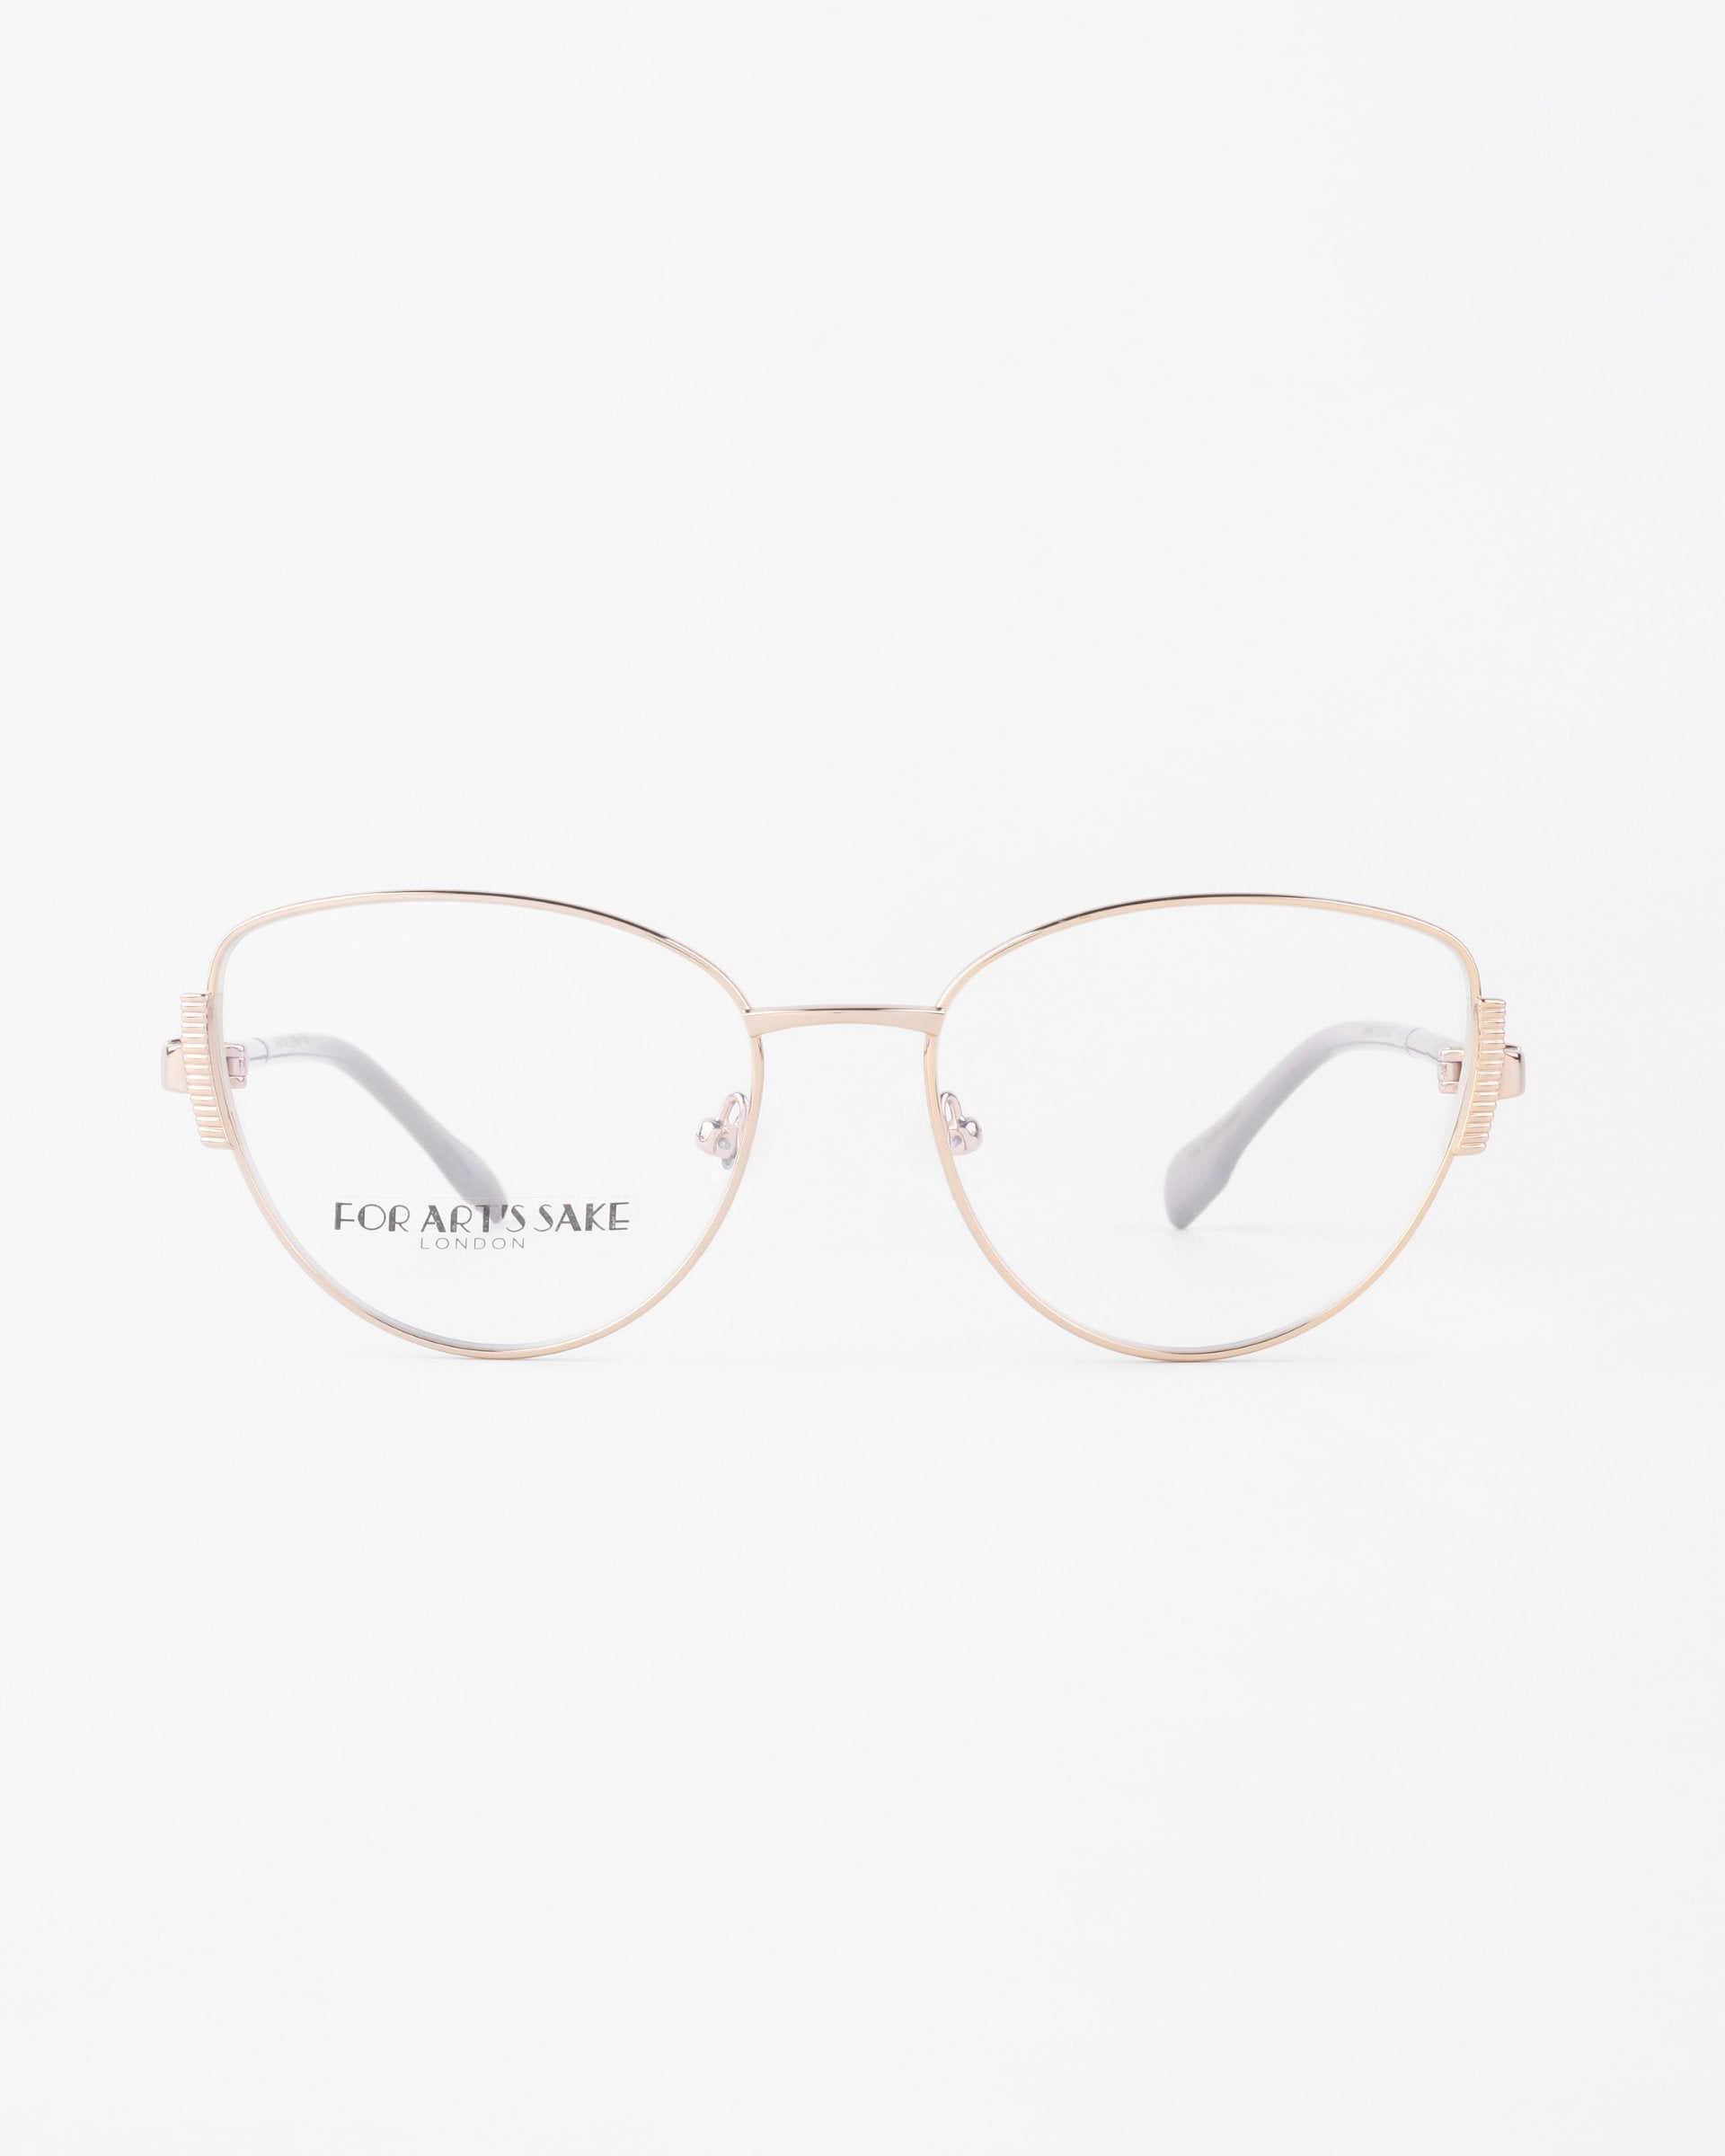 A pair of delicate, gold-framed eyeglasses with round lenses and prescription lenses. The frames are thin and minimalistic, with a slight cat-eye shape and jade stone nose pads. The words "For Art's Sake®" are etched on the left lens. The background is white.